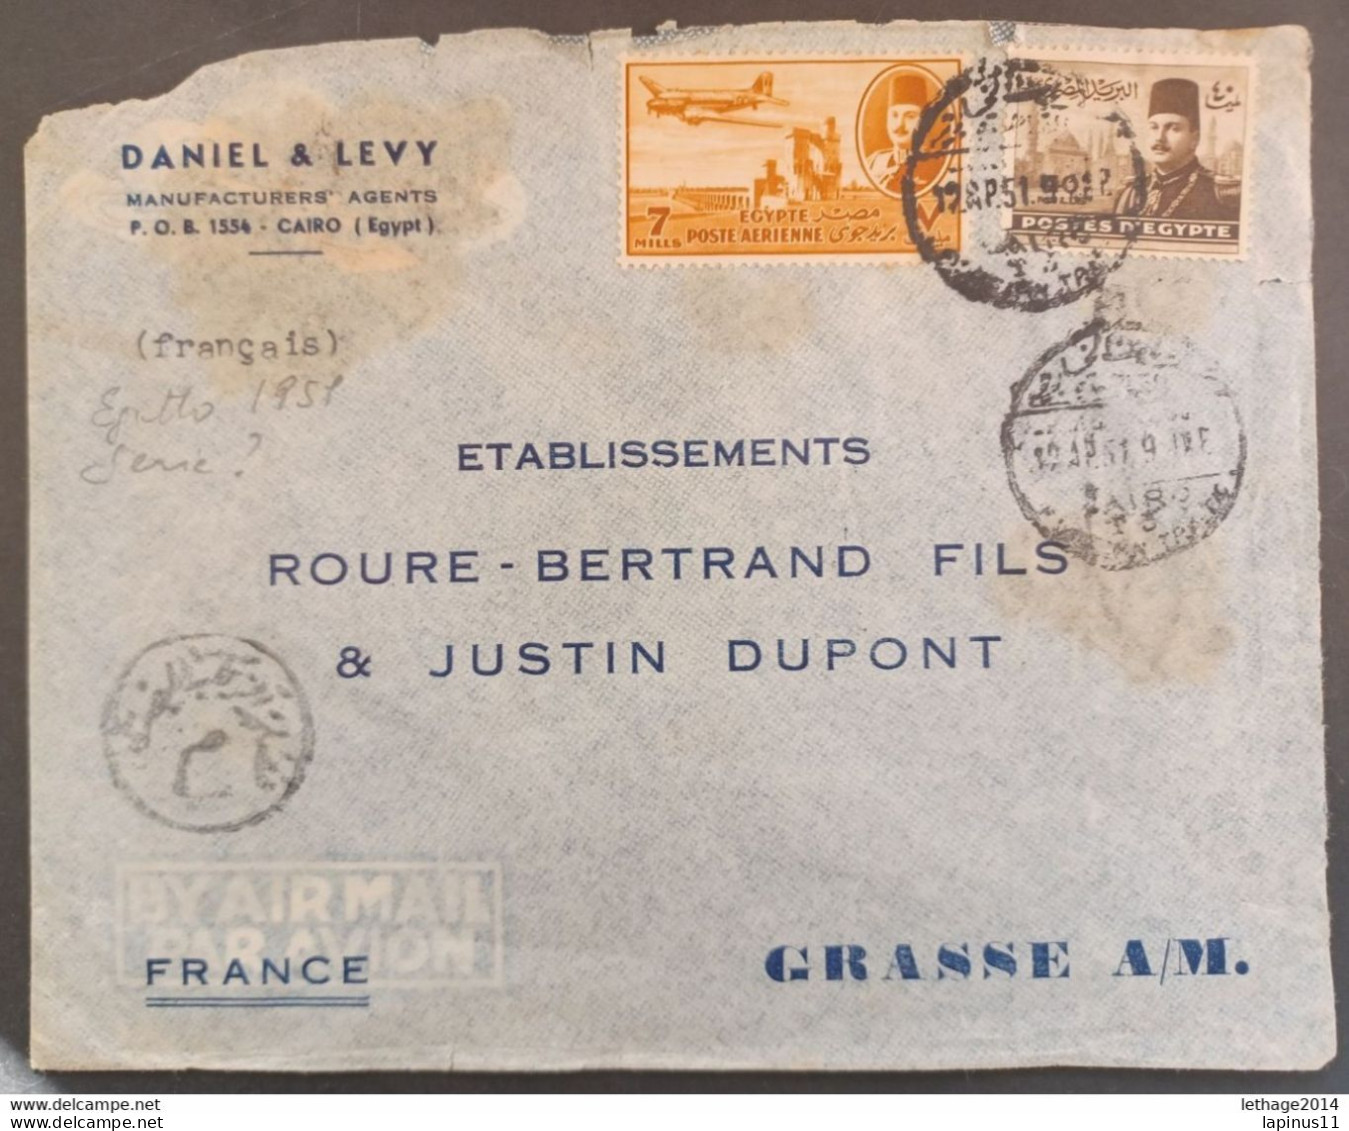 EGYPT مصر EGITTO 1951 KING FUAD COVER ETABLYSSMENTS FINANCIAL CAIRO TO GRASSE FRANCE - Airmail